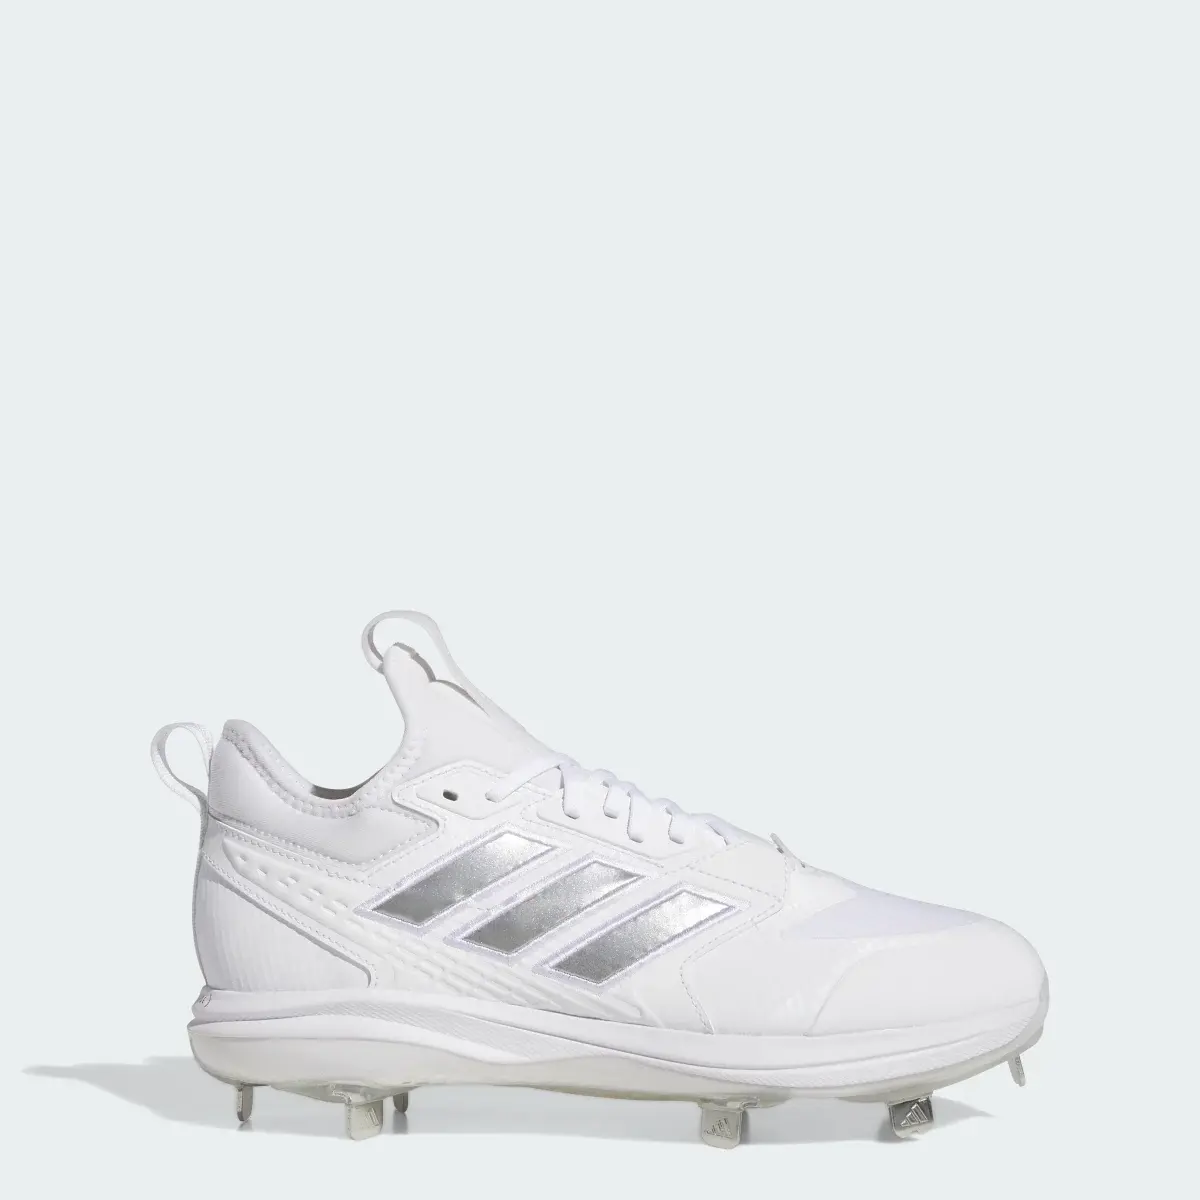 Adidas Icon 8 BOOST Cleats. 1